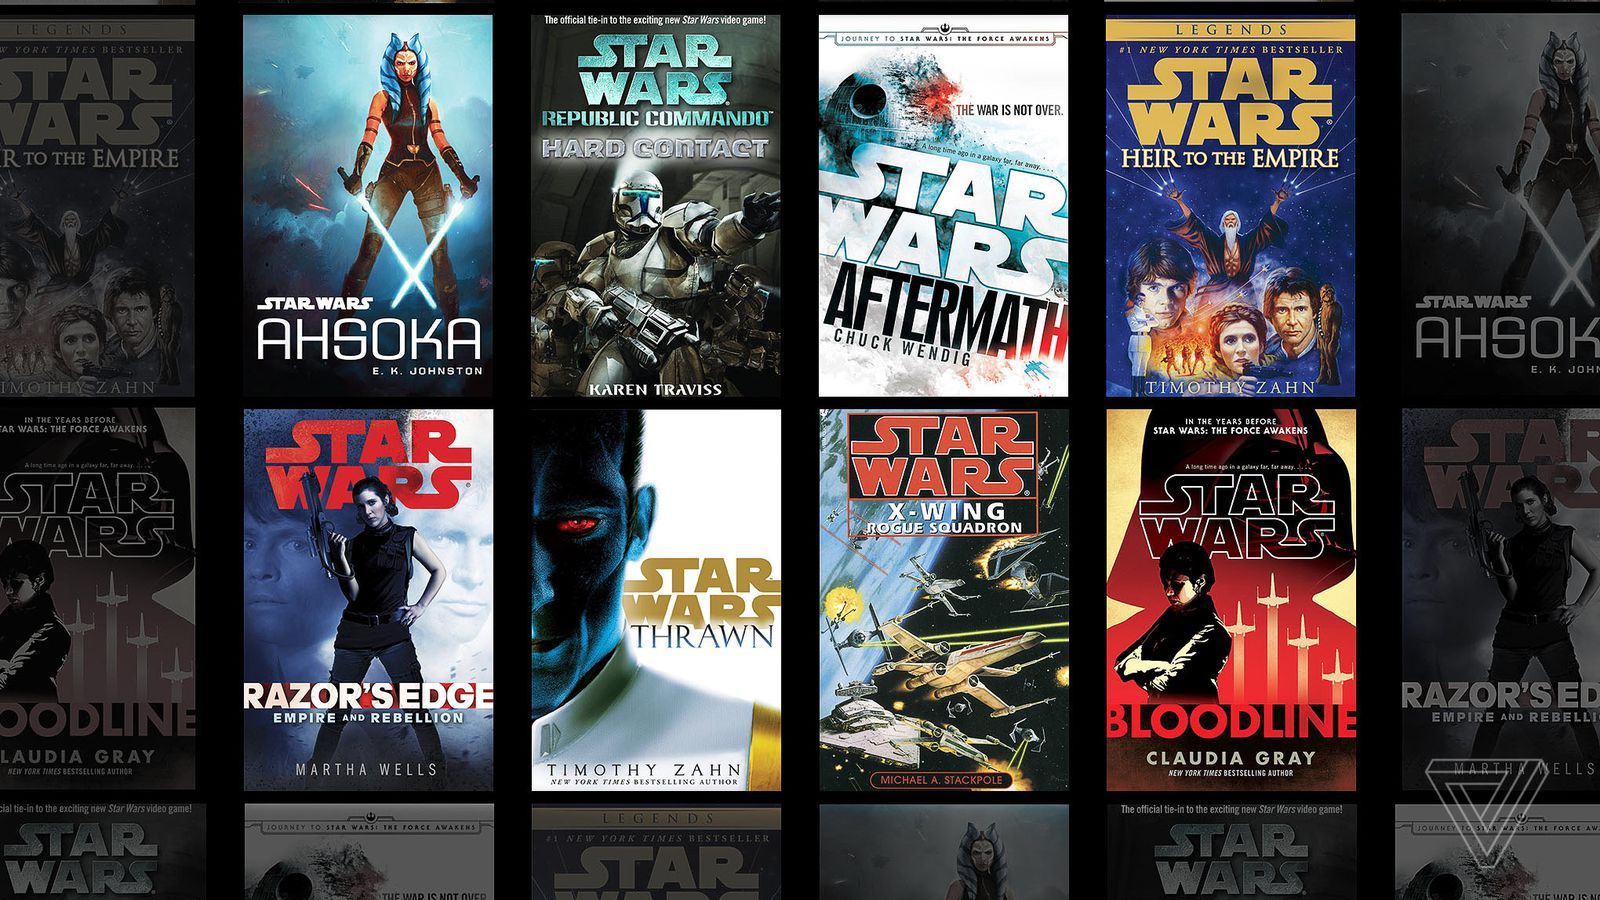 Star Wars reading list: where to start after you finish the movies